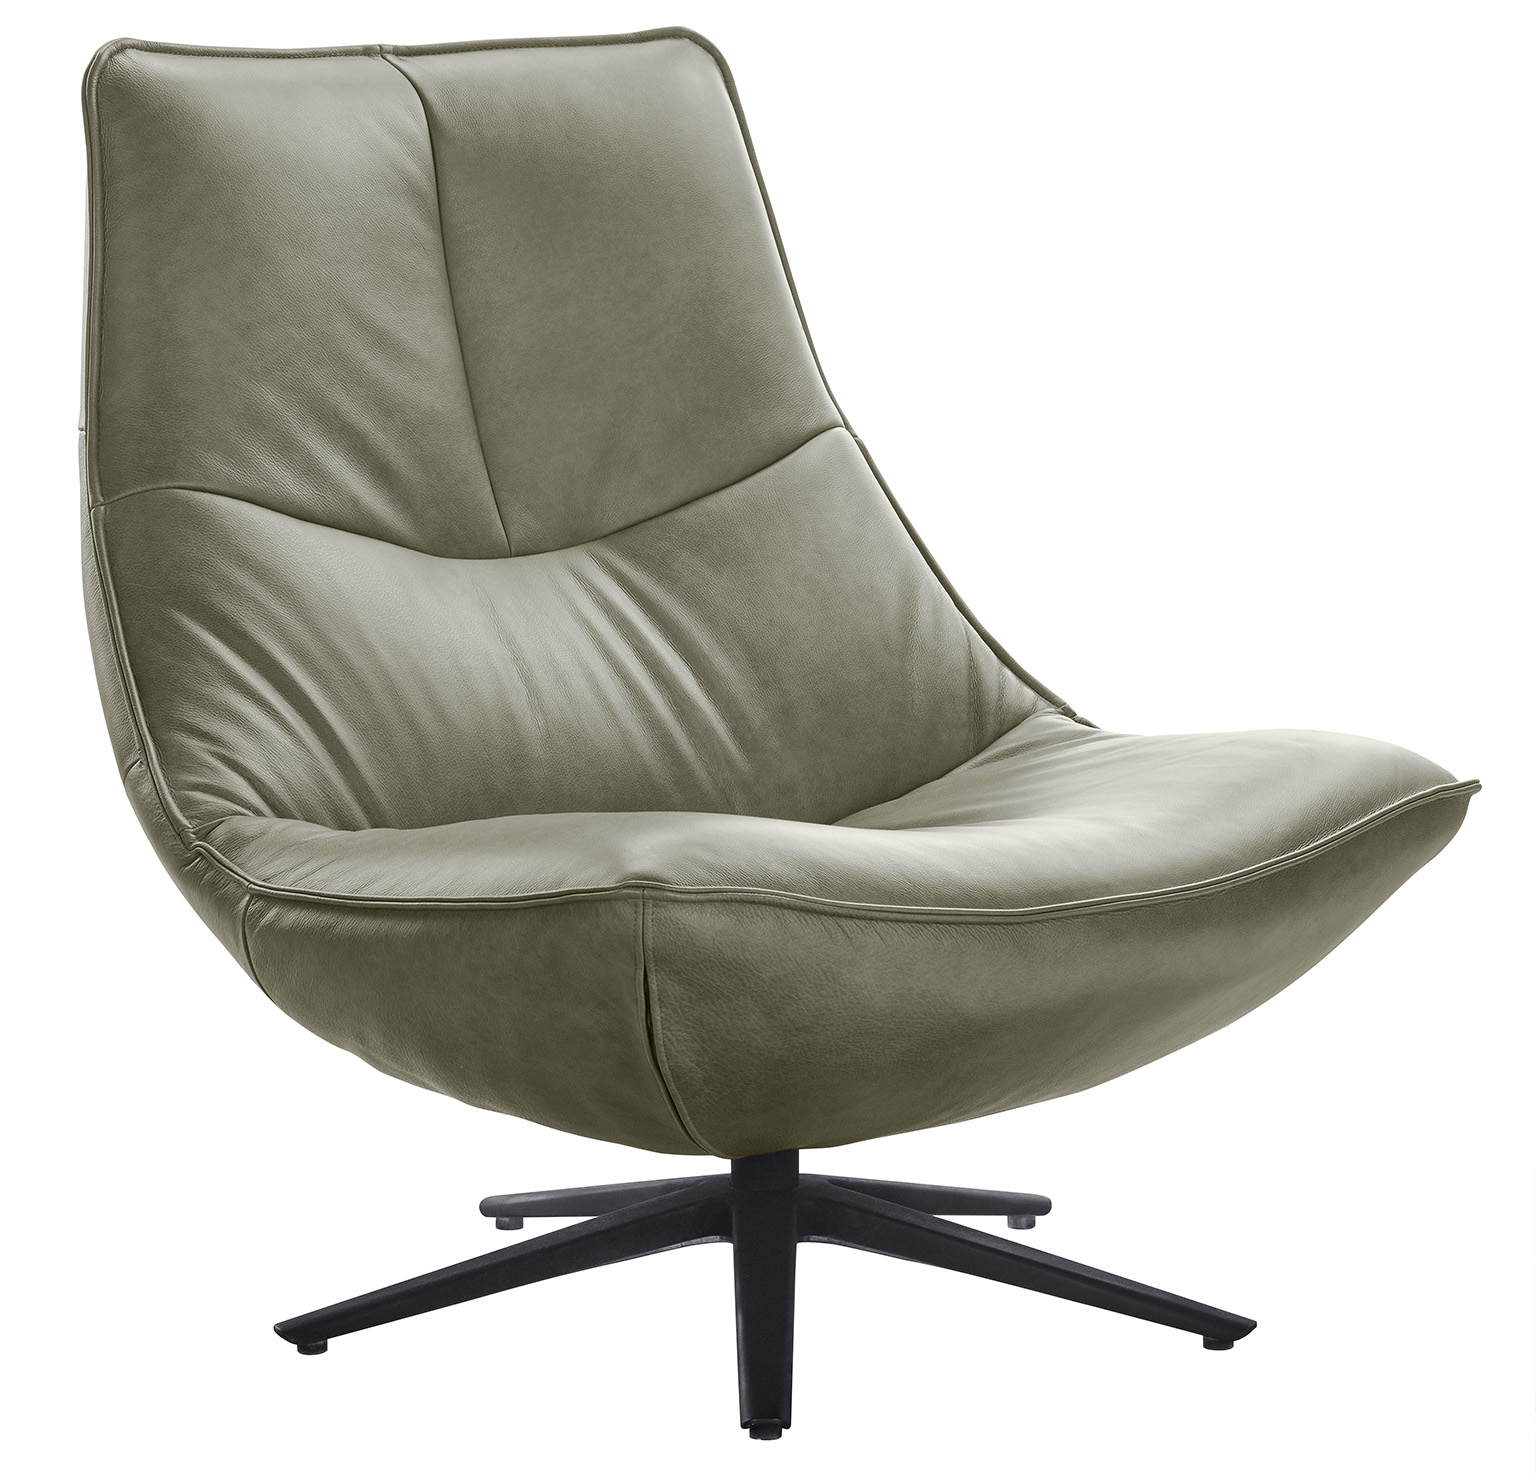 Manzone Moss fauteuil In.House